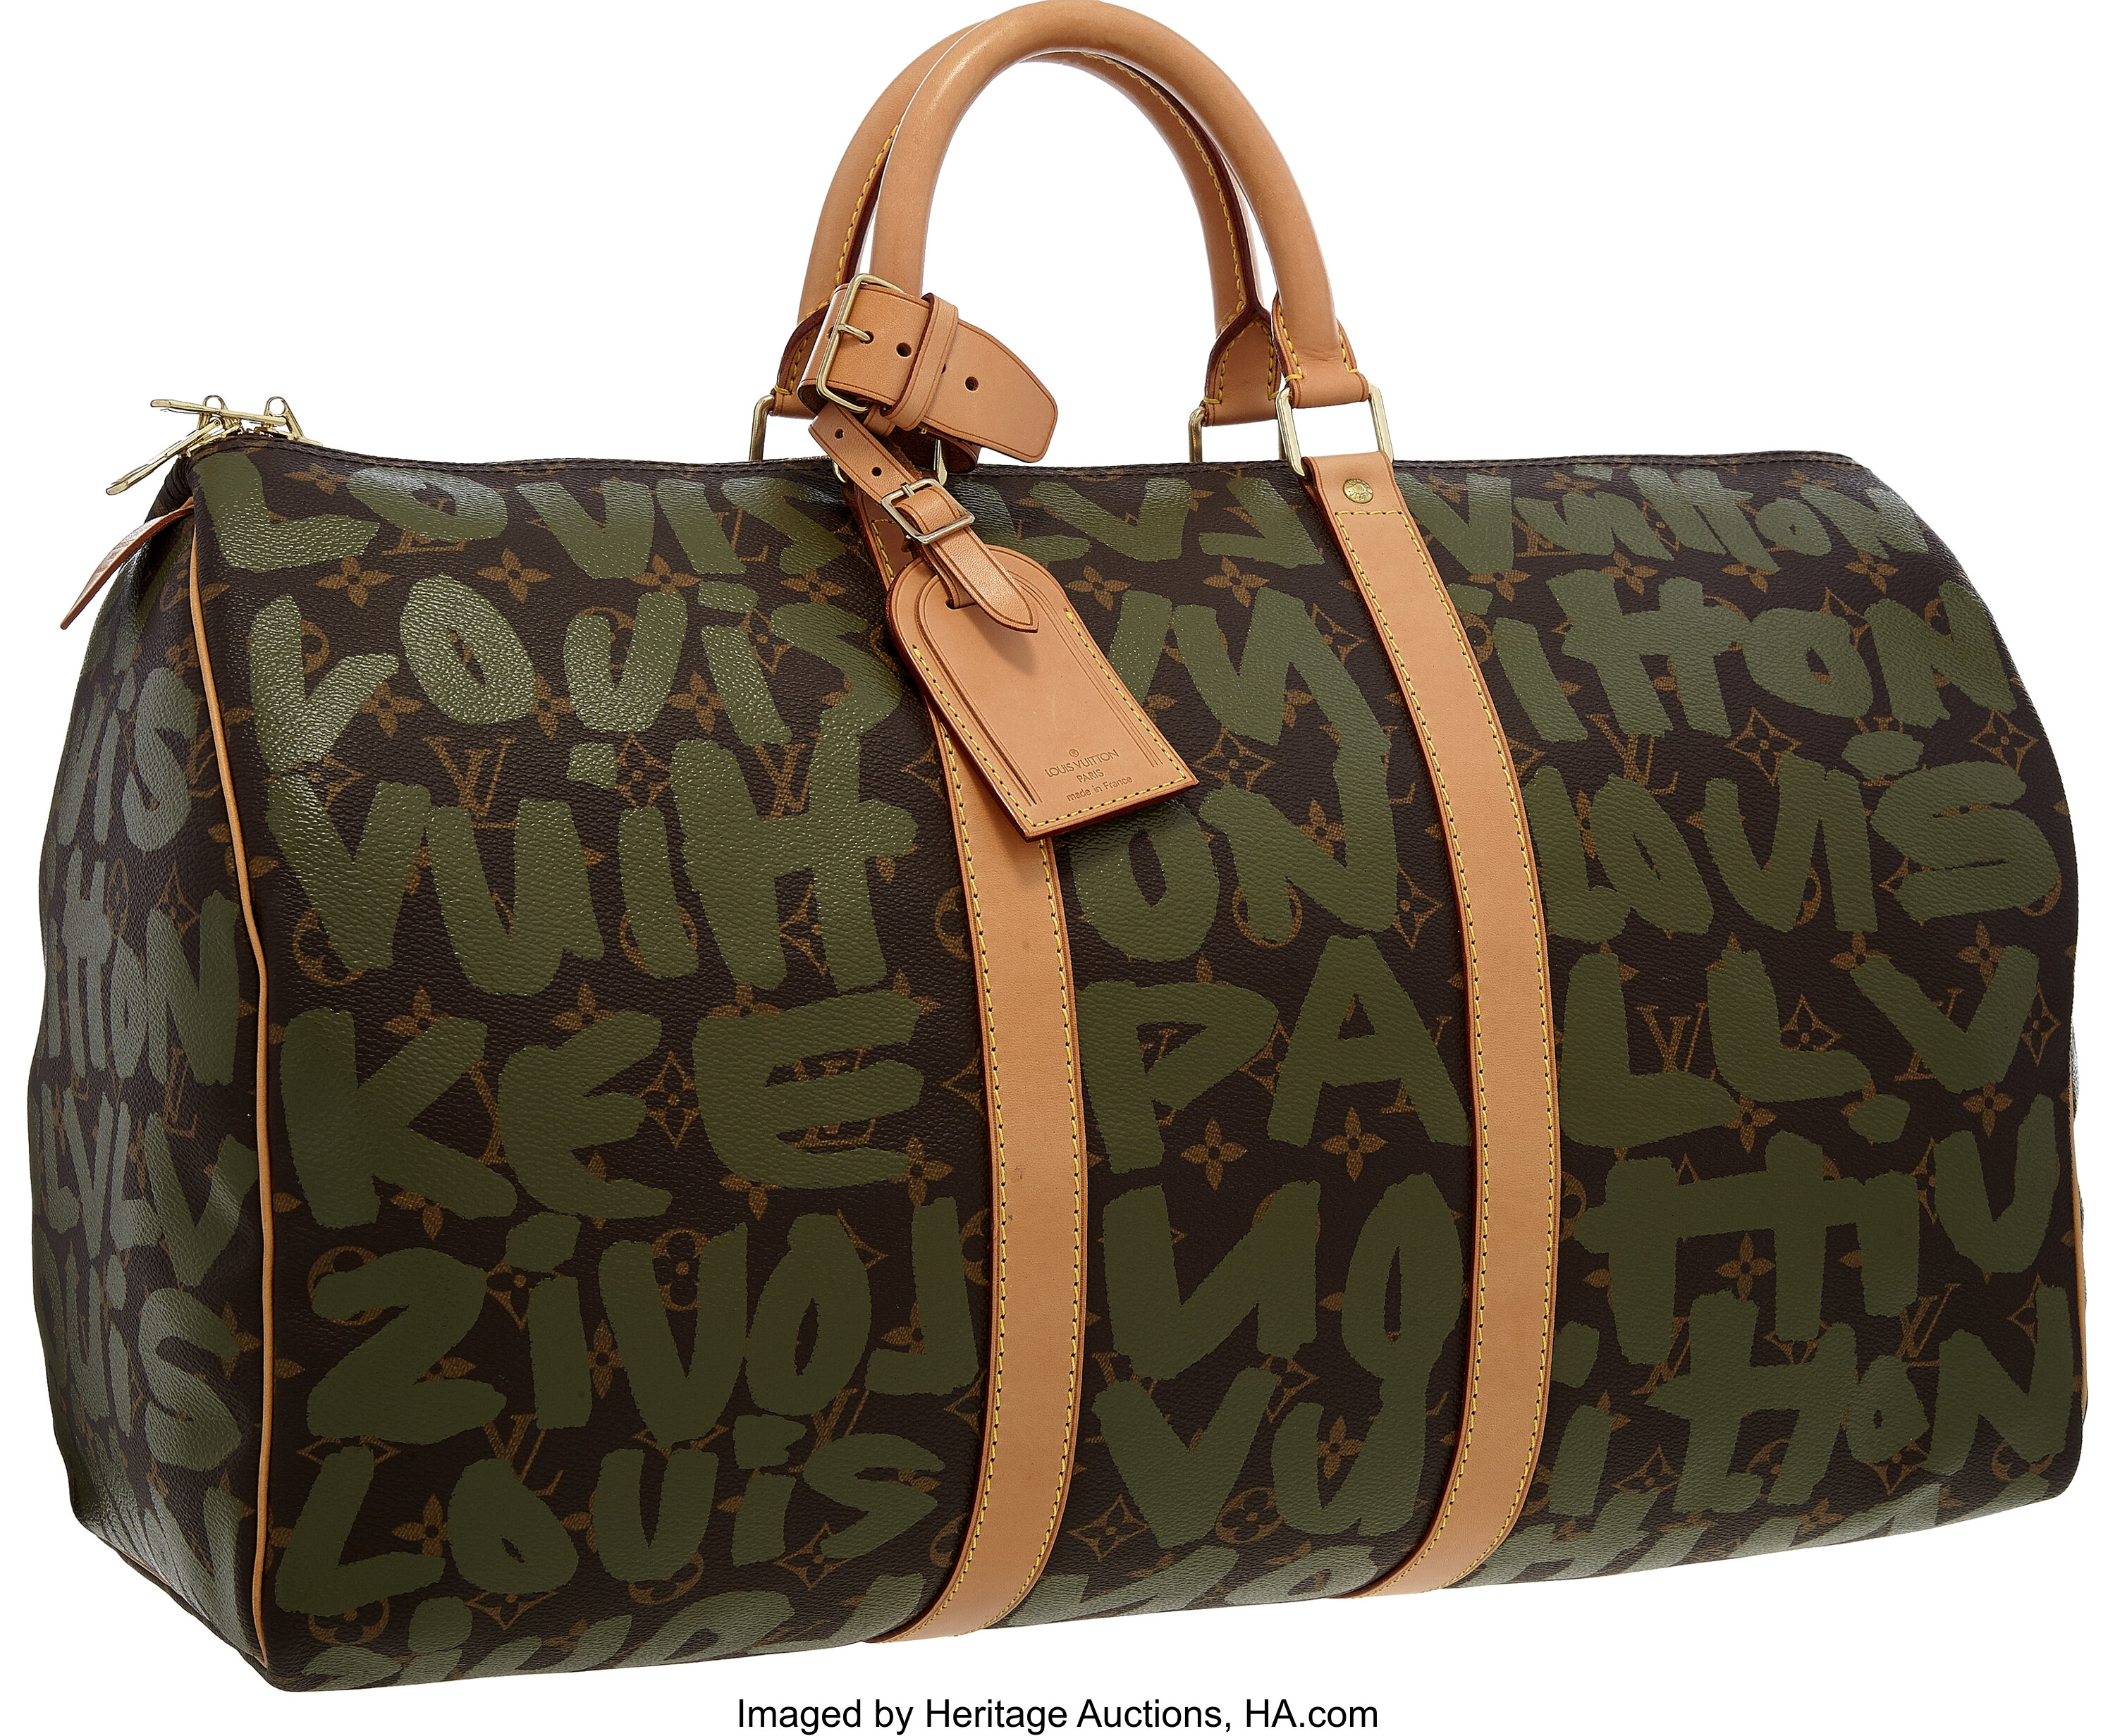 Louis Vuitton Limited Edition Monogram Graffiti Keepall 50, 2001 Available  For Immediate Sale At Sotheby's